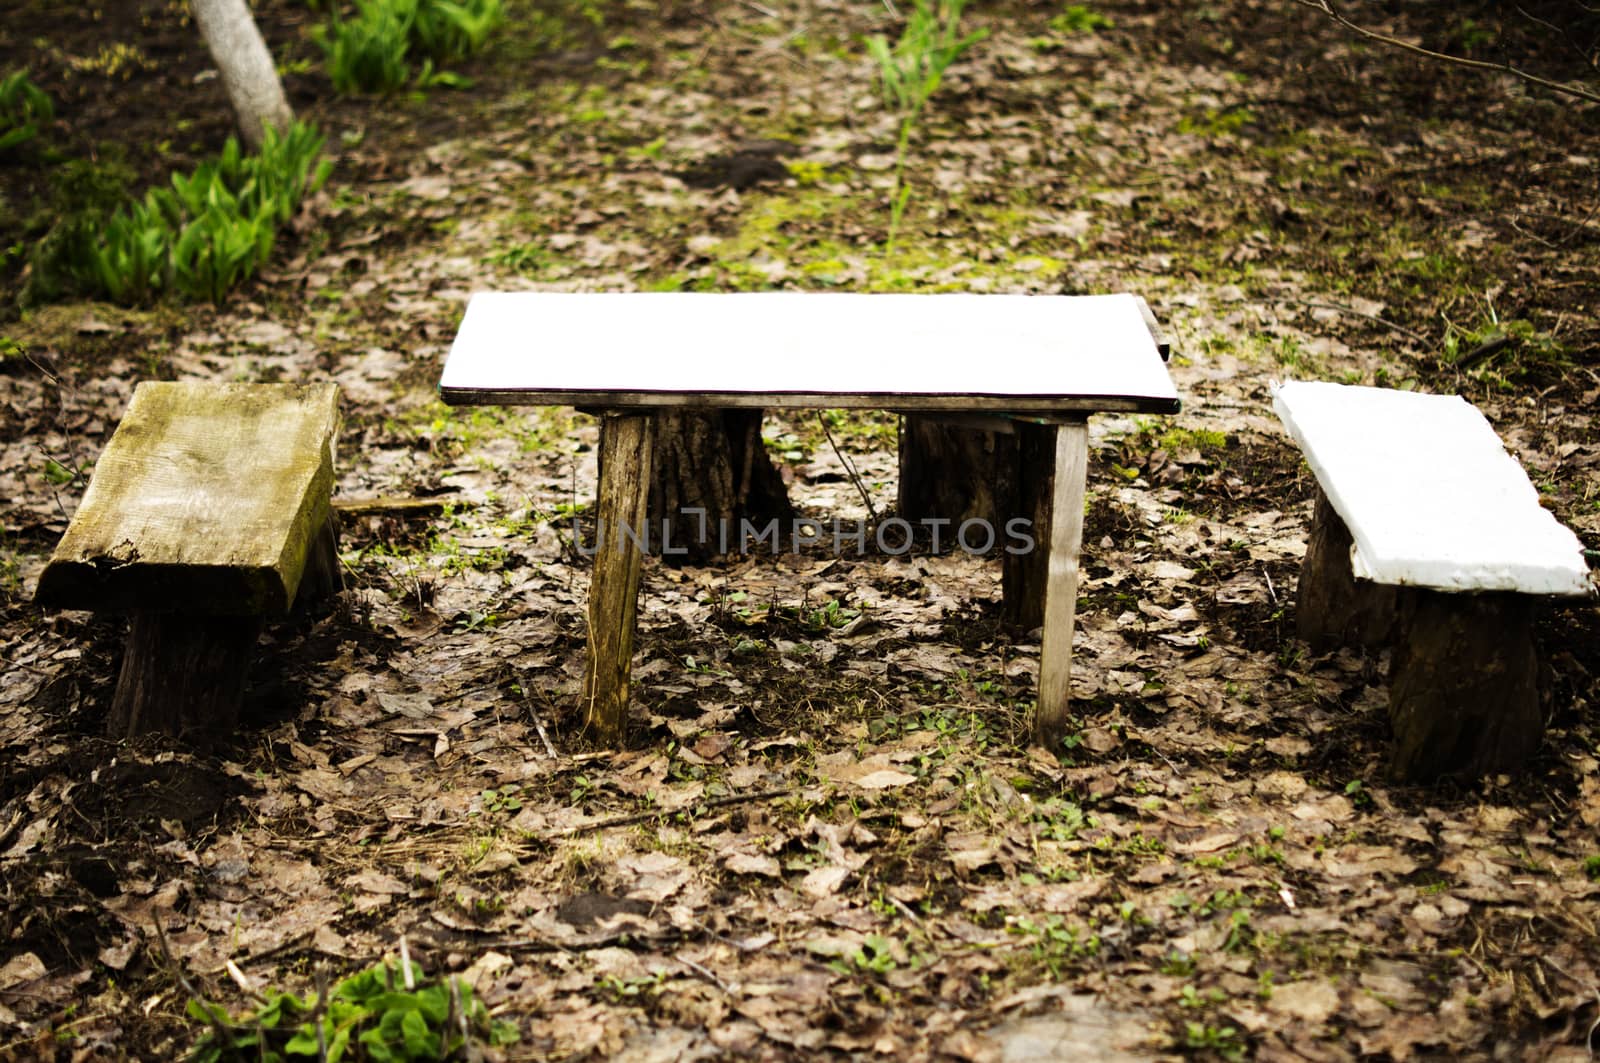 benches in the woods. For your commercial and editorial use